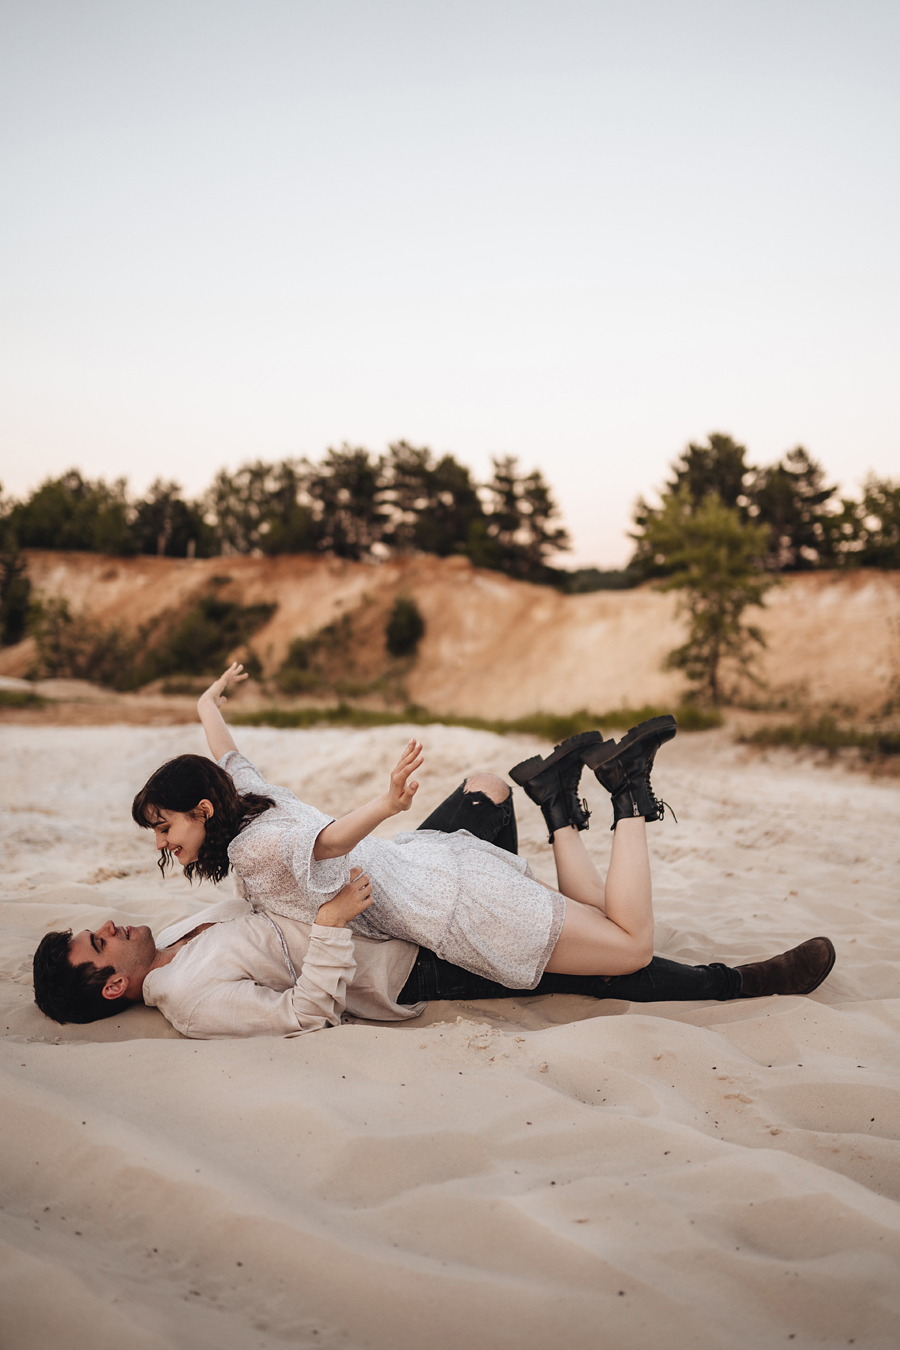 Couple poses at the beach 🏝️ | Gallery posted by Morganalexis17 | Lemon8